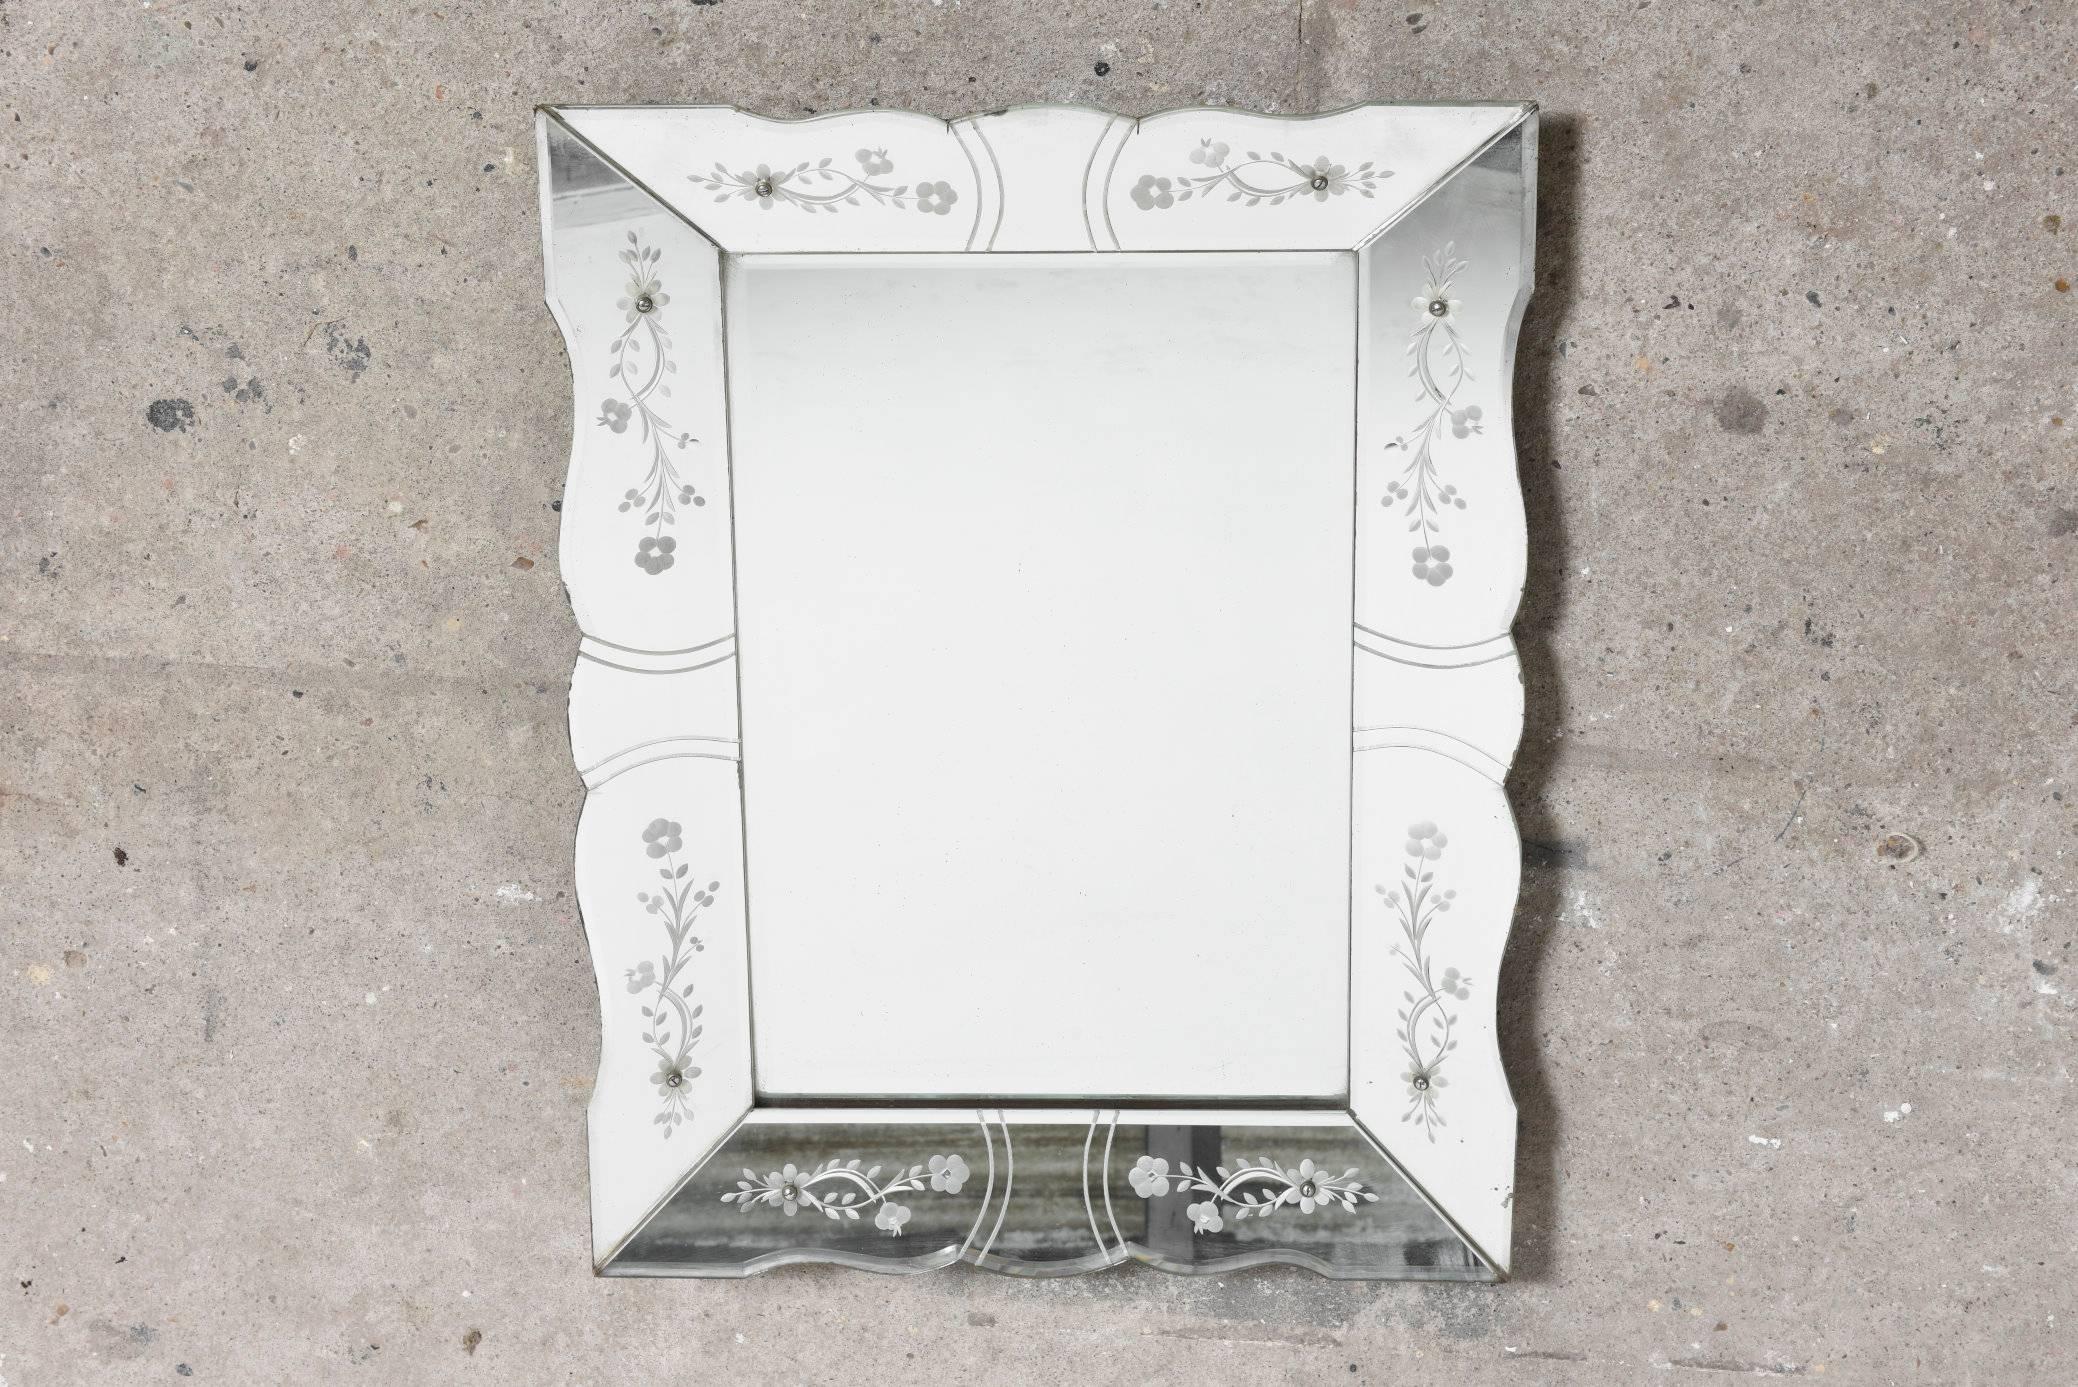 Vintage French wall mirror decorated with floral etched elegantly scalloped bevelled frame panels which surrounds a clear glass bevelled edge mirror. This piece is in overall good vintage condition, with no significant loss of silvering to the